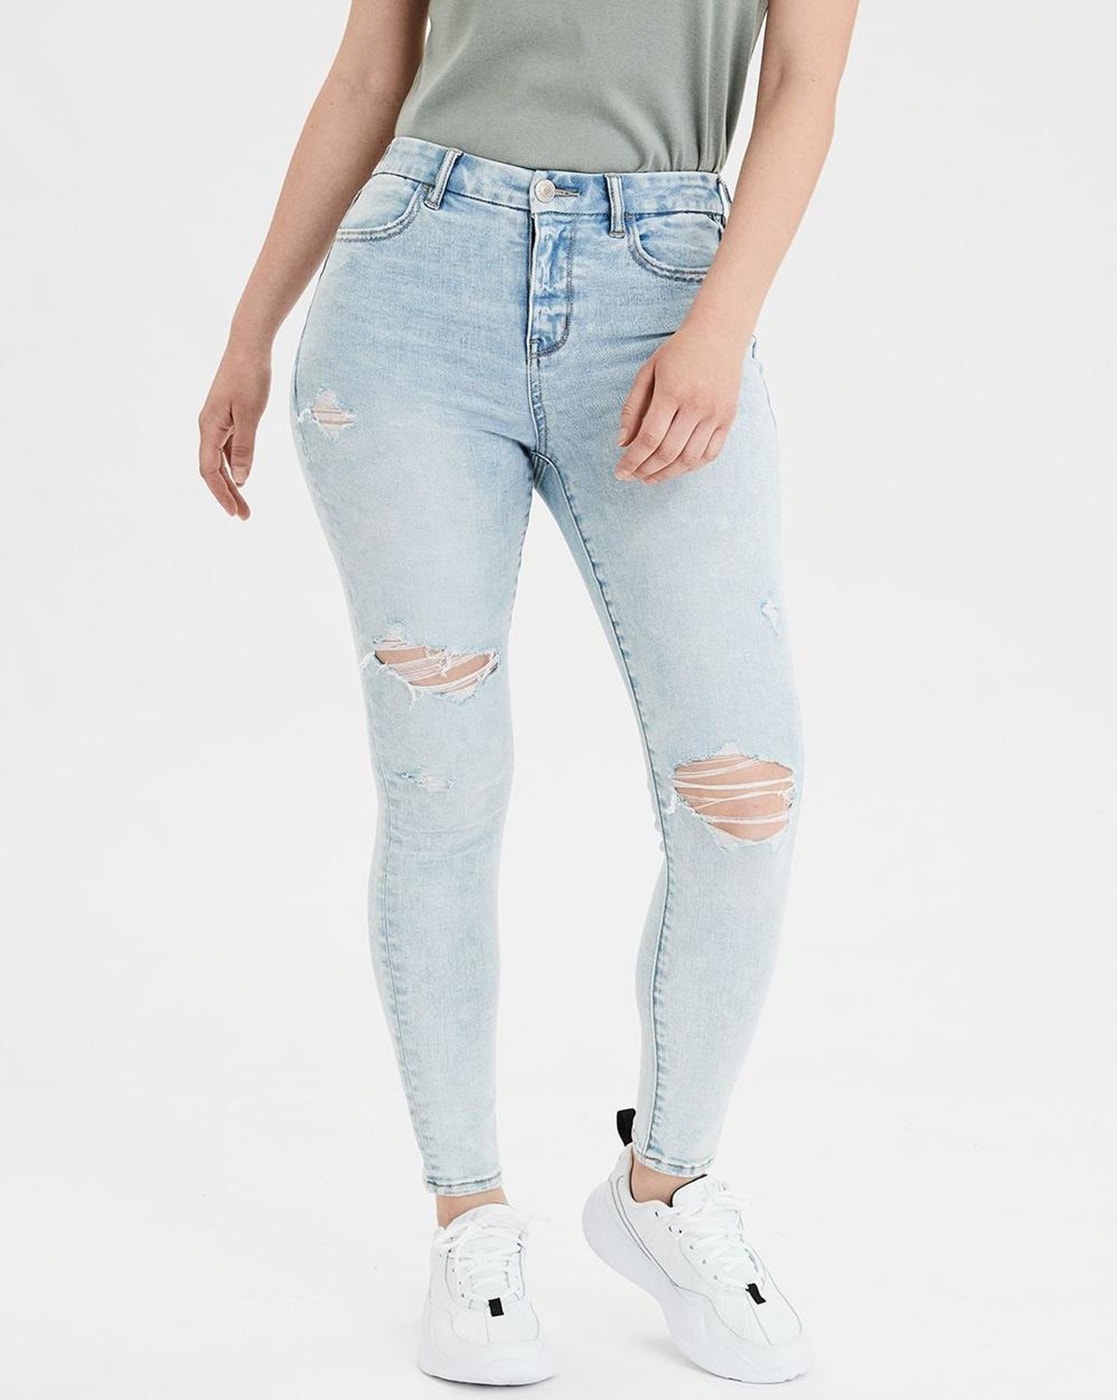 Buy Blue Jeans Jeggings for American Eagle Outfitters | Ajio.com